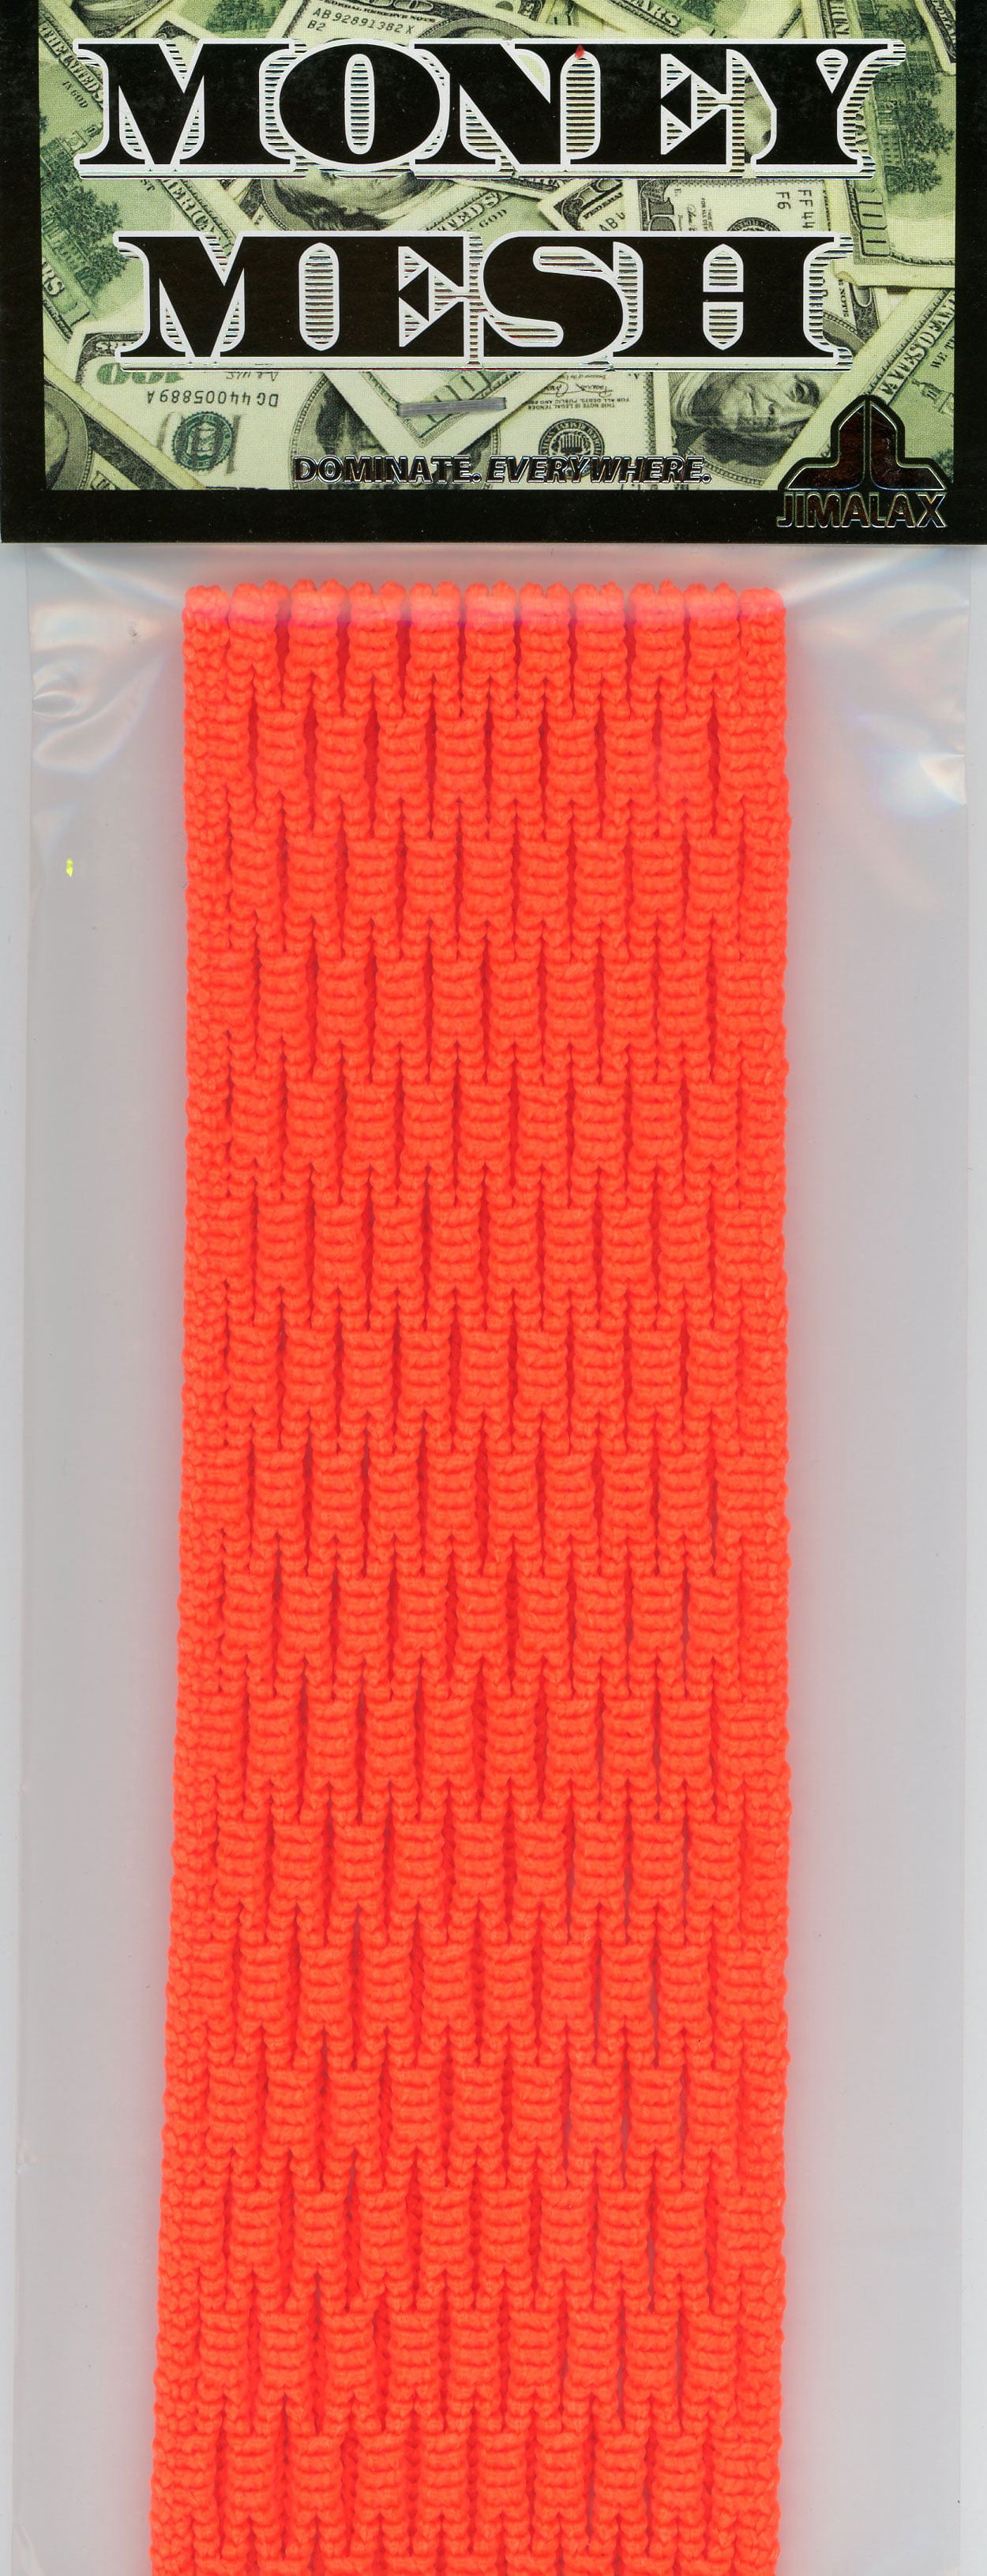 Jimalax Lacrosse by Performall Sports Money Mesh Attack Mesh Assorted Colors 